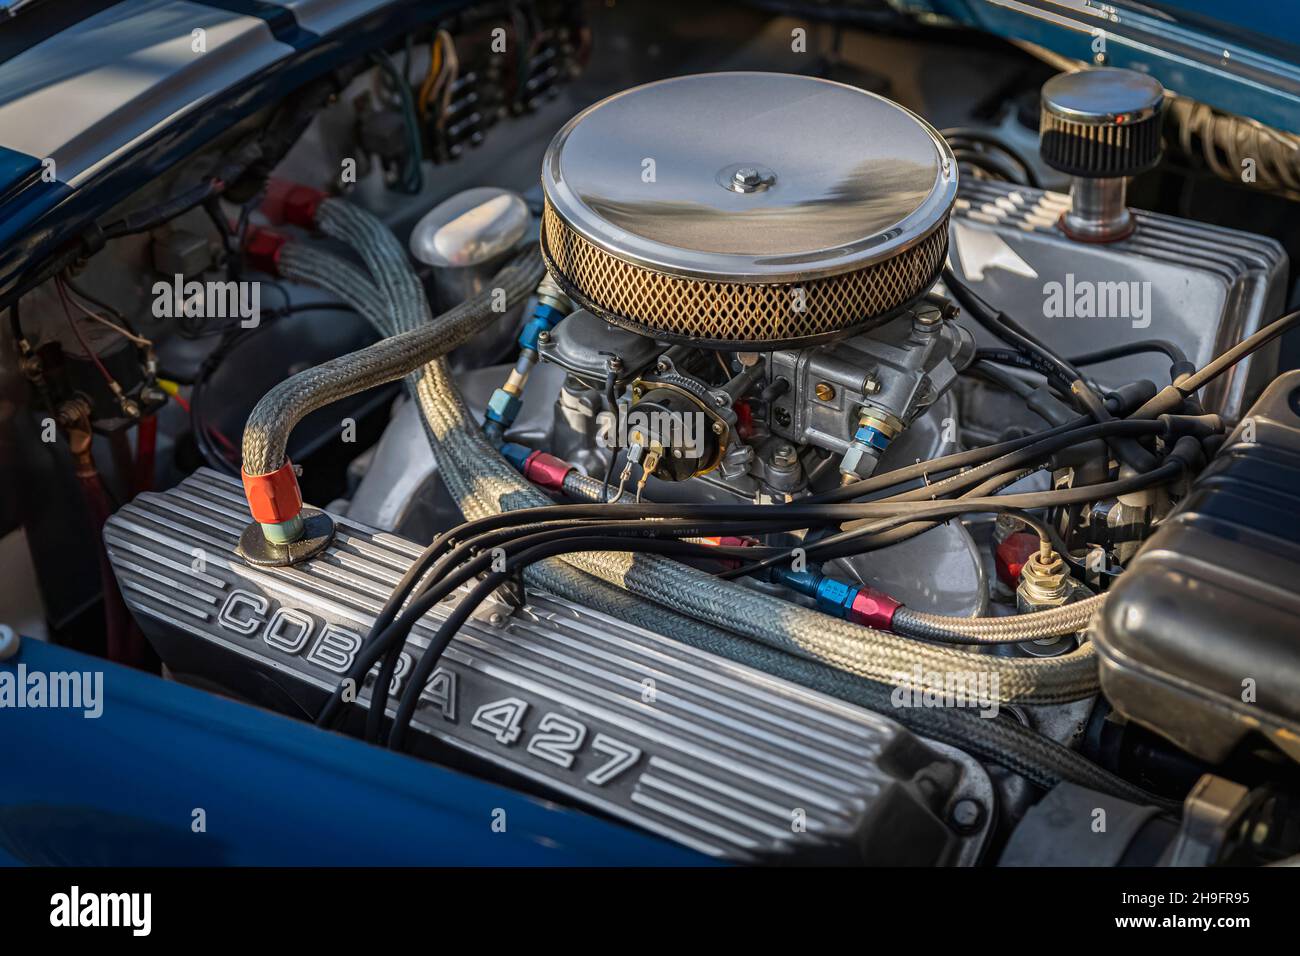 Placerville, USA - November 25, 2020: Open hood and engine of a classic rare vintage American muscle car blue 1967 Ford Shelby Cobra 427 Stock Photo